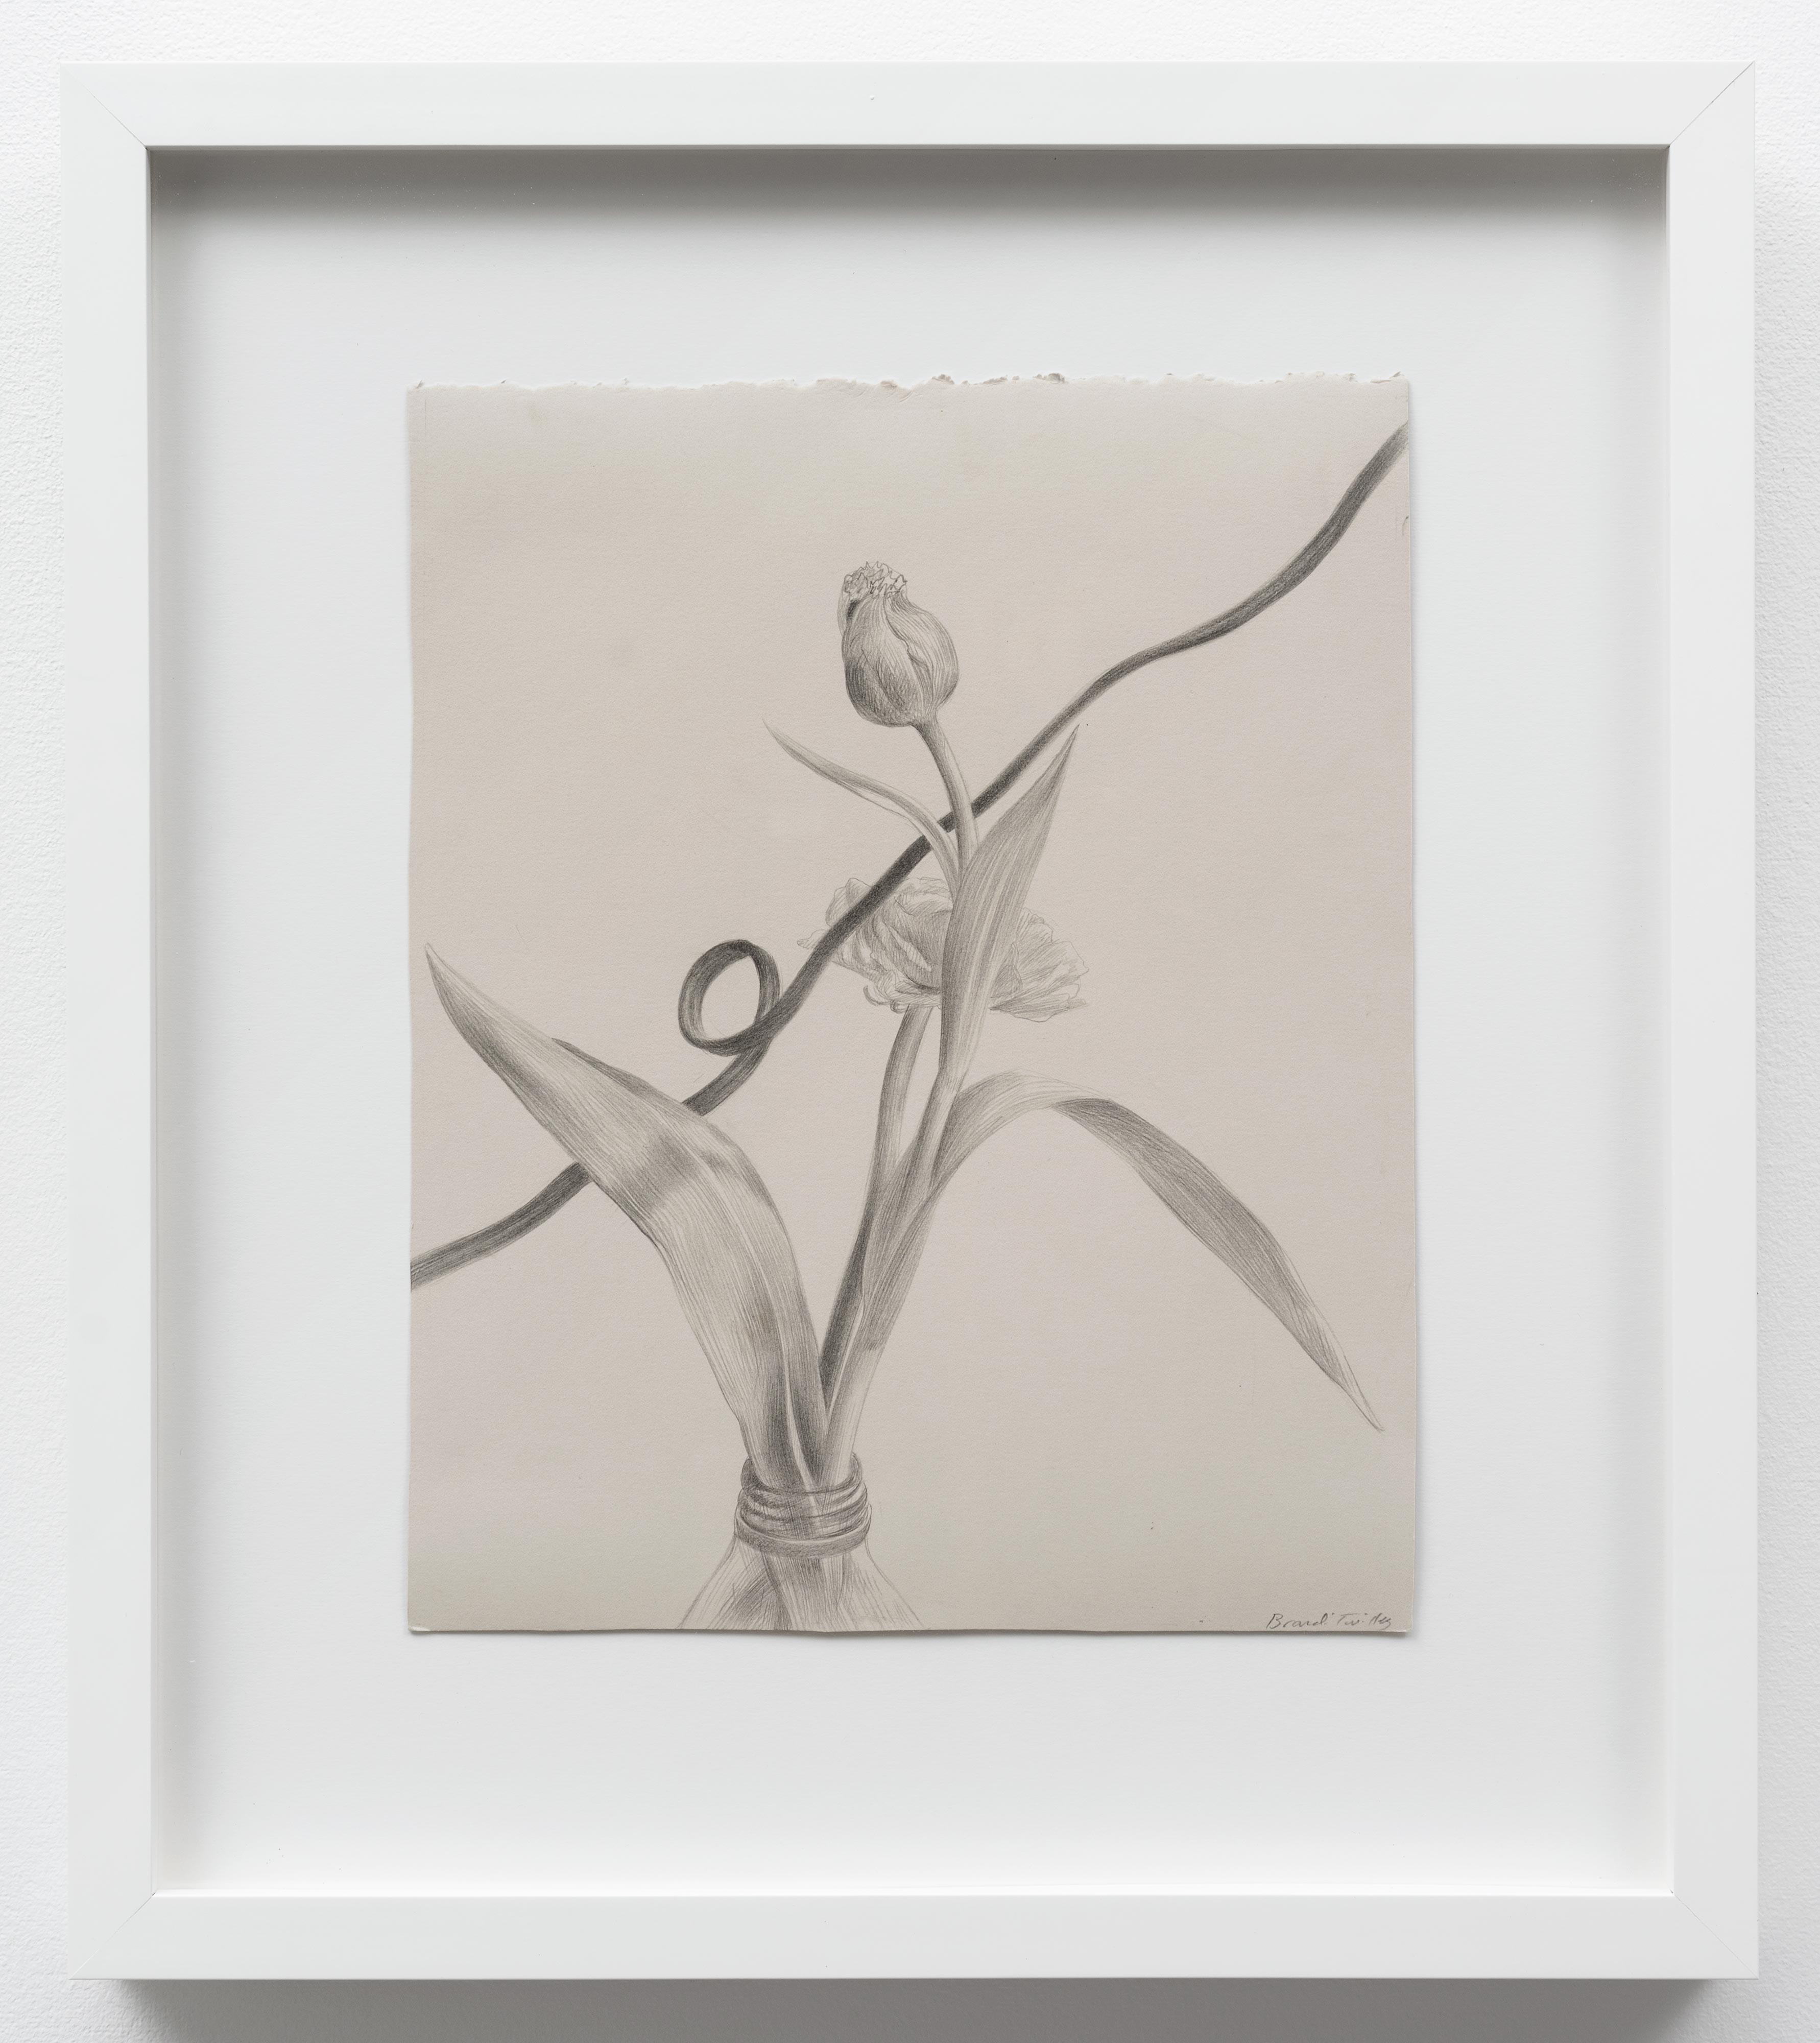 Brandi Twilley<br>Flowers with Cord II<br>2014<br>Graphite on gray paper<br>9 x 11 in (23 x 28 cm)